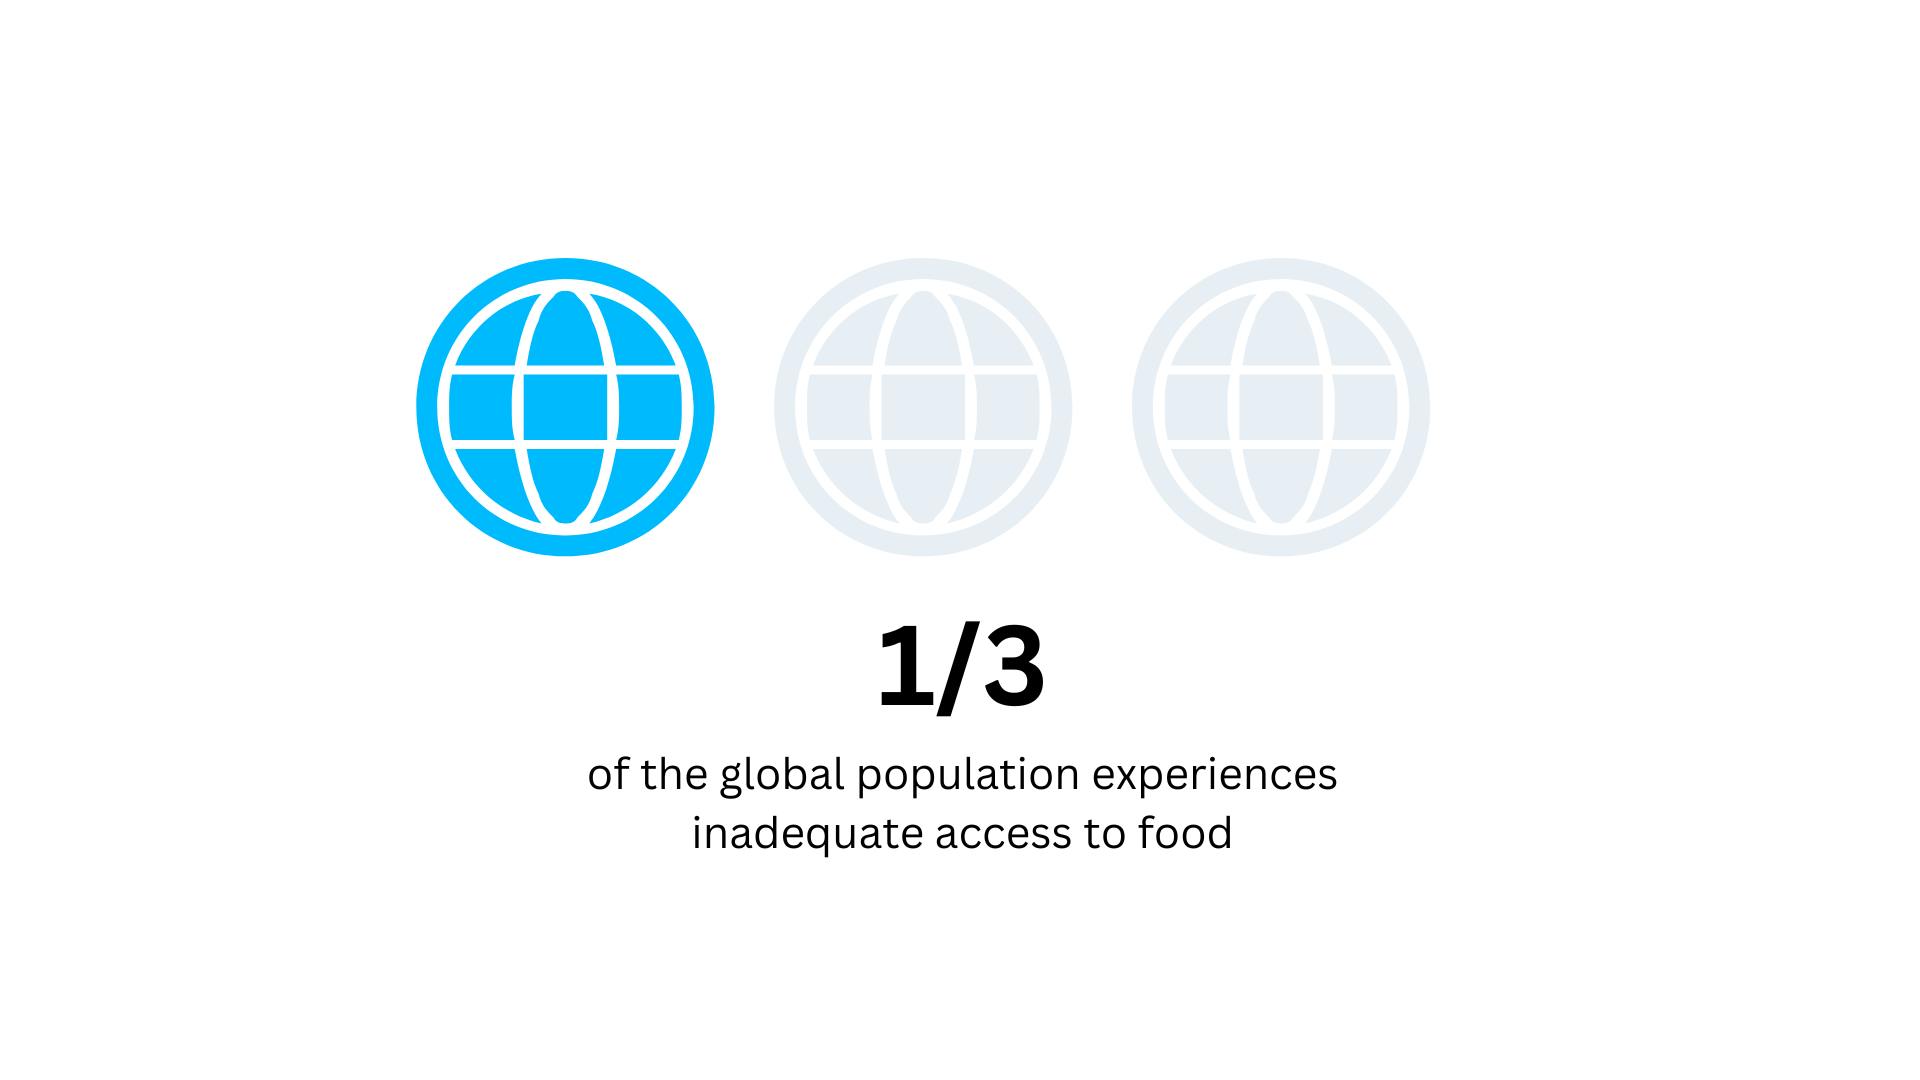 Food waste statistics - The reality of the food security crisis: